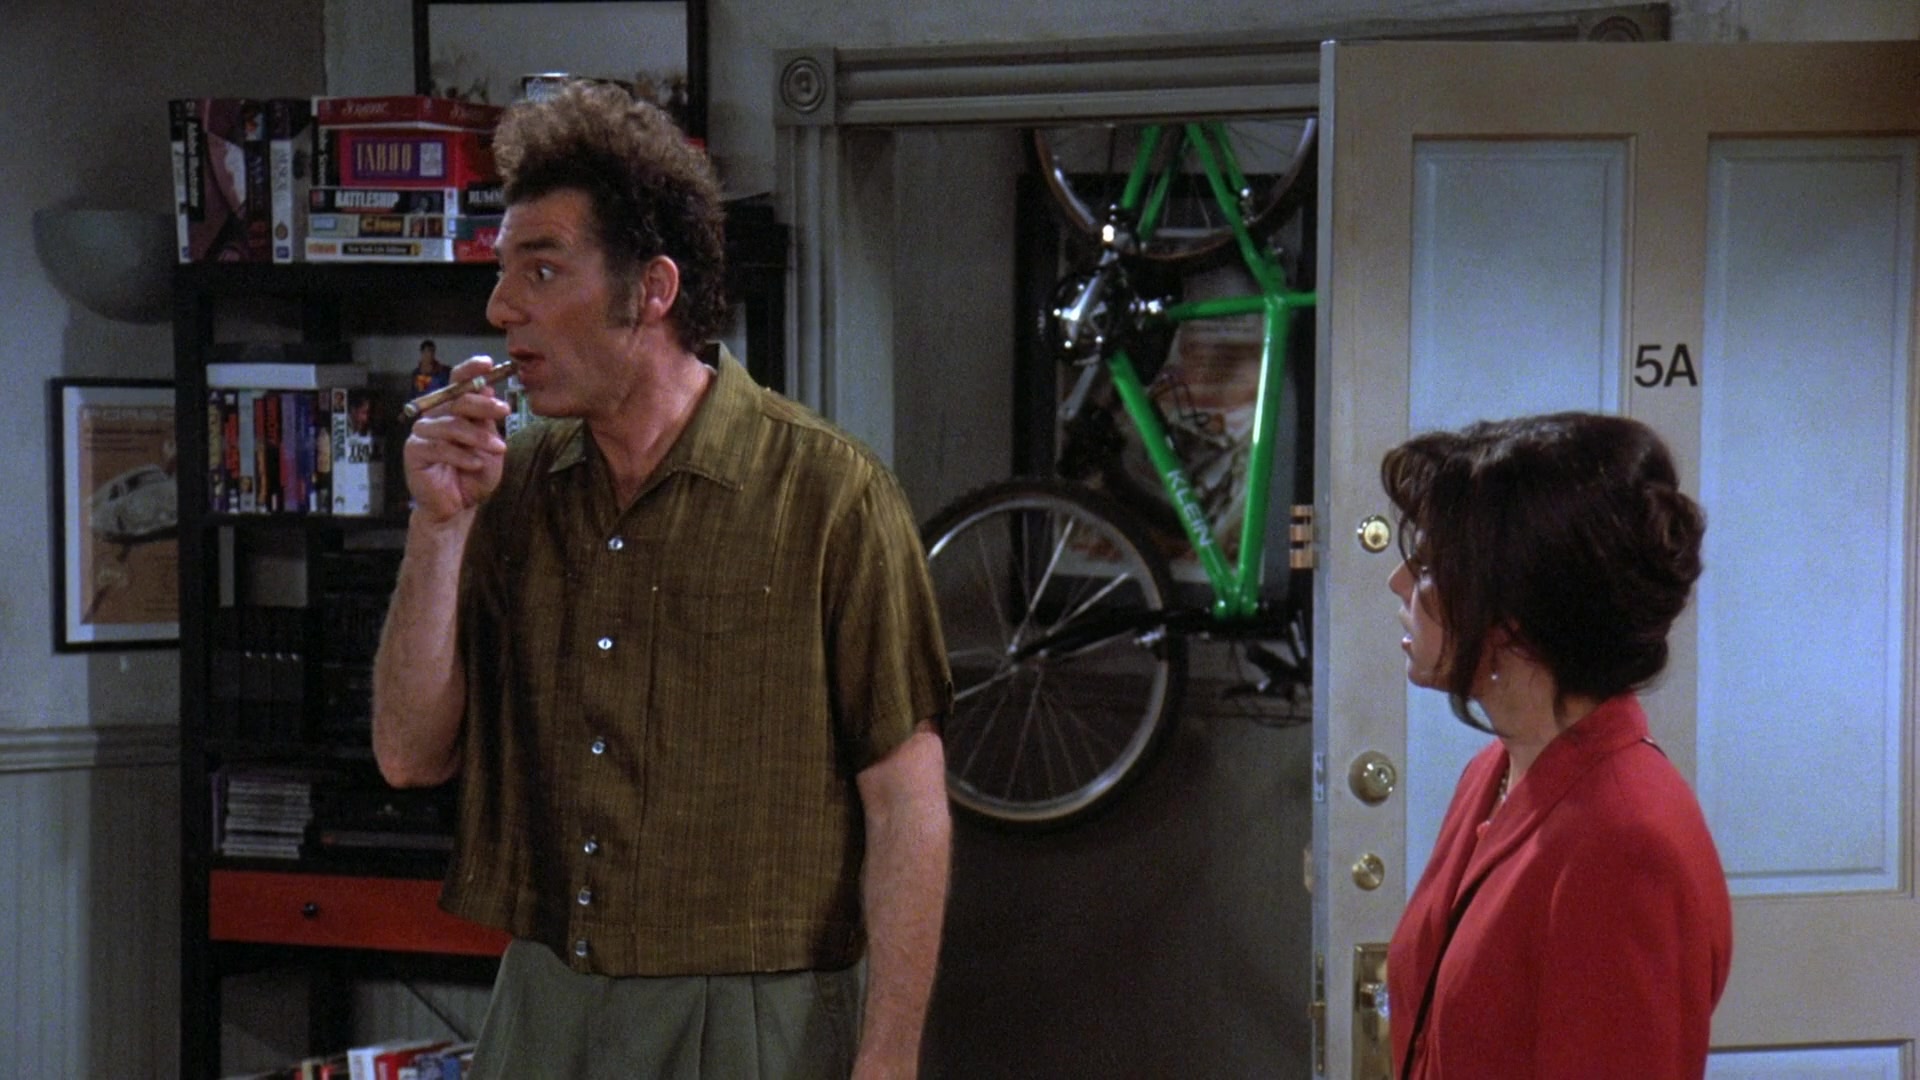 Klein Bicycle In Seinfeld Season 7 Episode 24 "The Invitations" (...